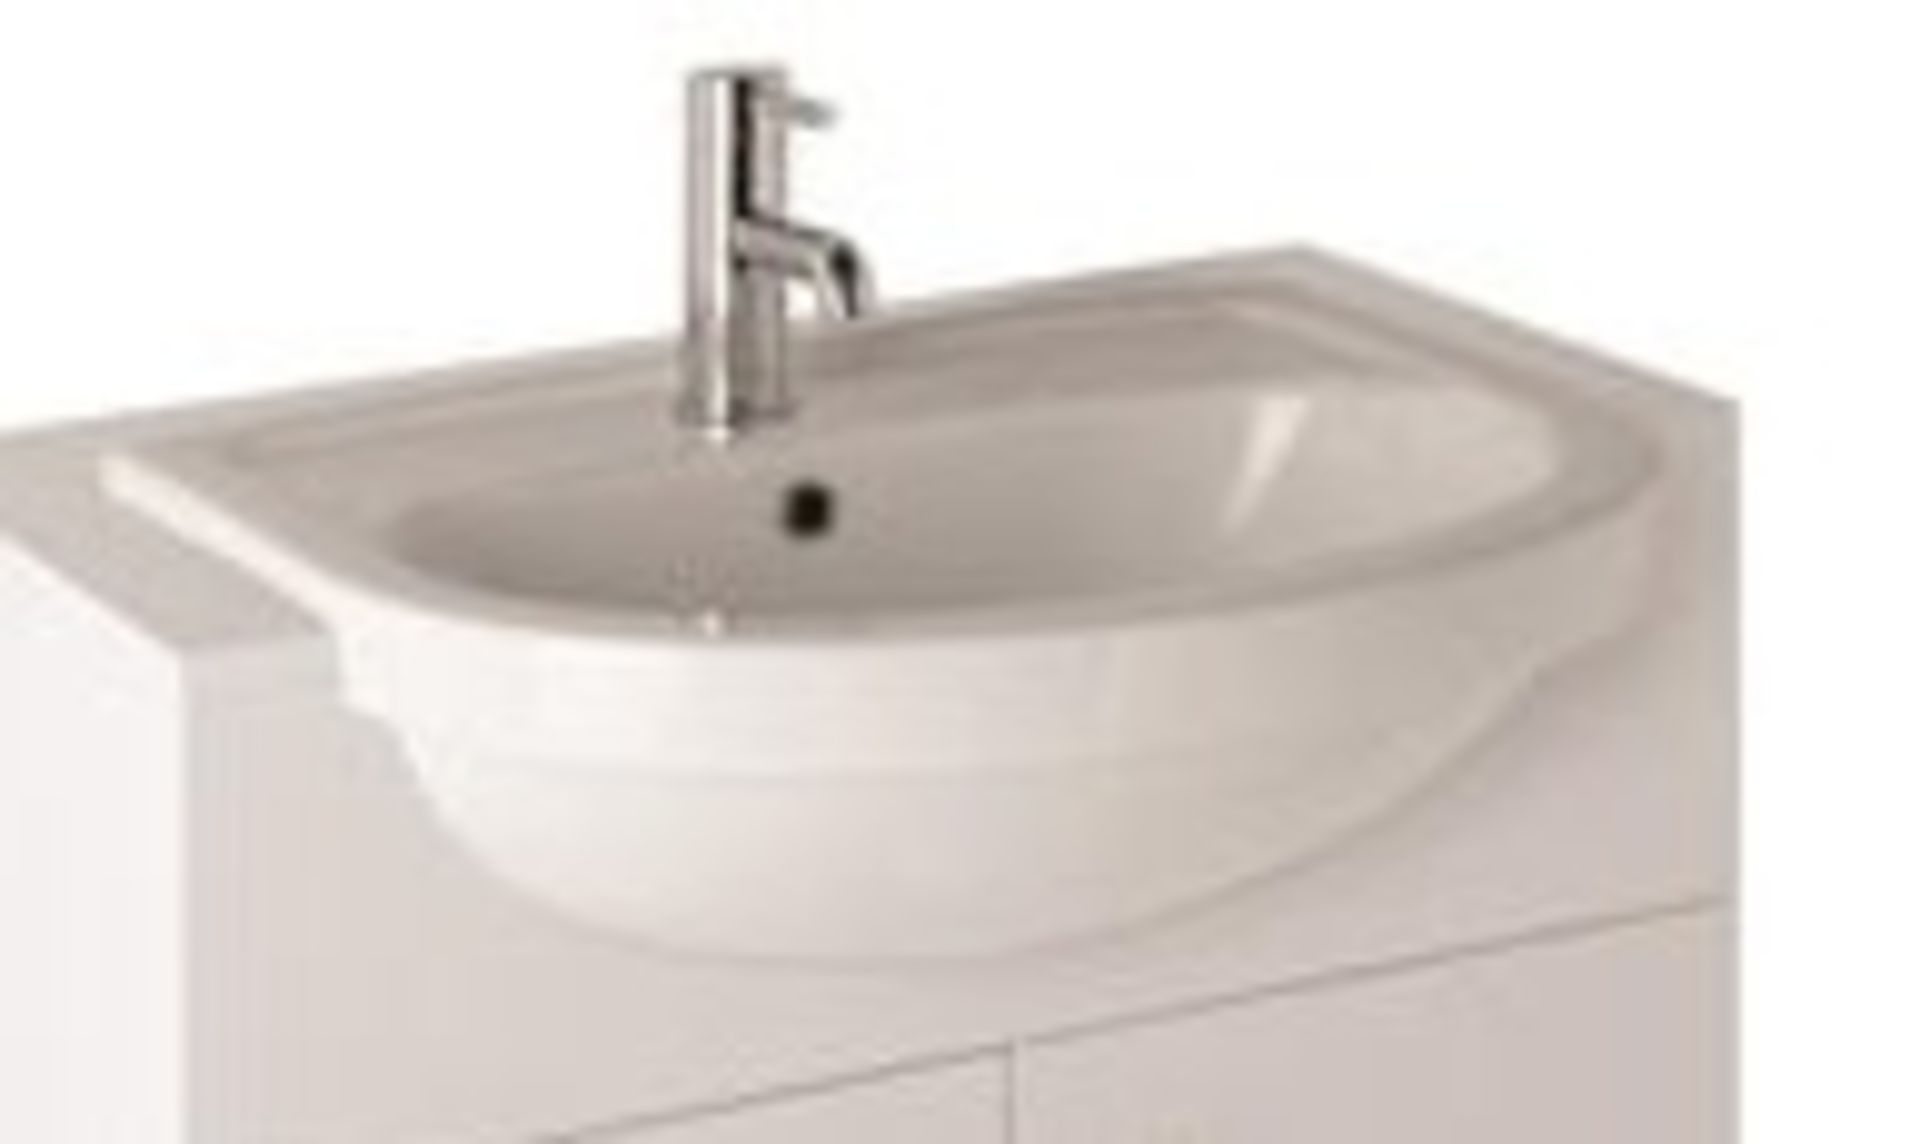 10 x Vogue Bathrooms KUDOS Semi Recessed SINK BASINS - Single Tap Hole 550mm - Brand New Boxed Stock